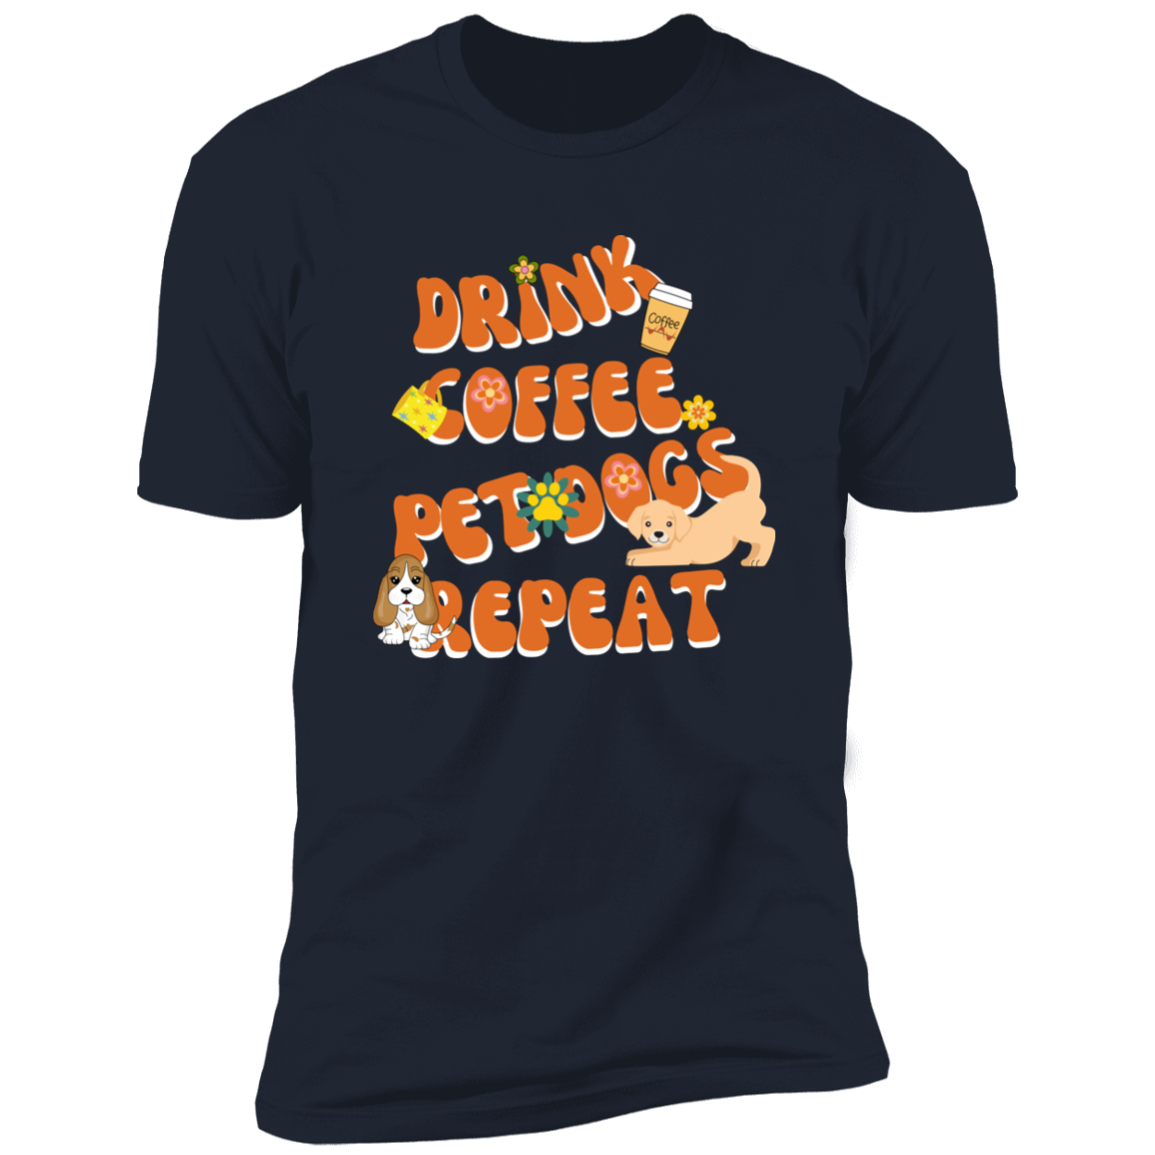 Drink Coffee Pet dogs repeat dog  Shirt, funny dog shirt for humans, dog mom and dog dad shirt, in navy blue